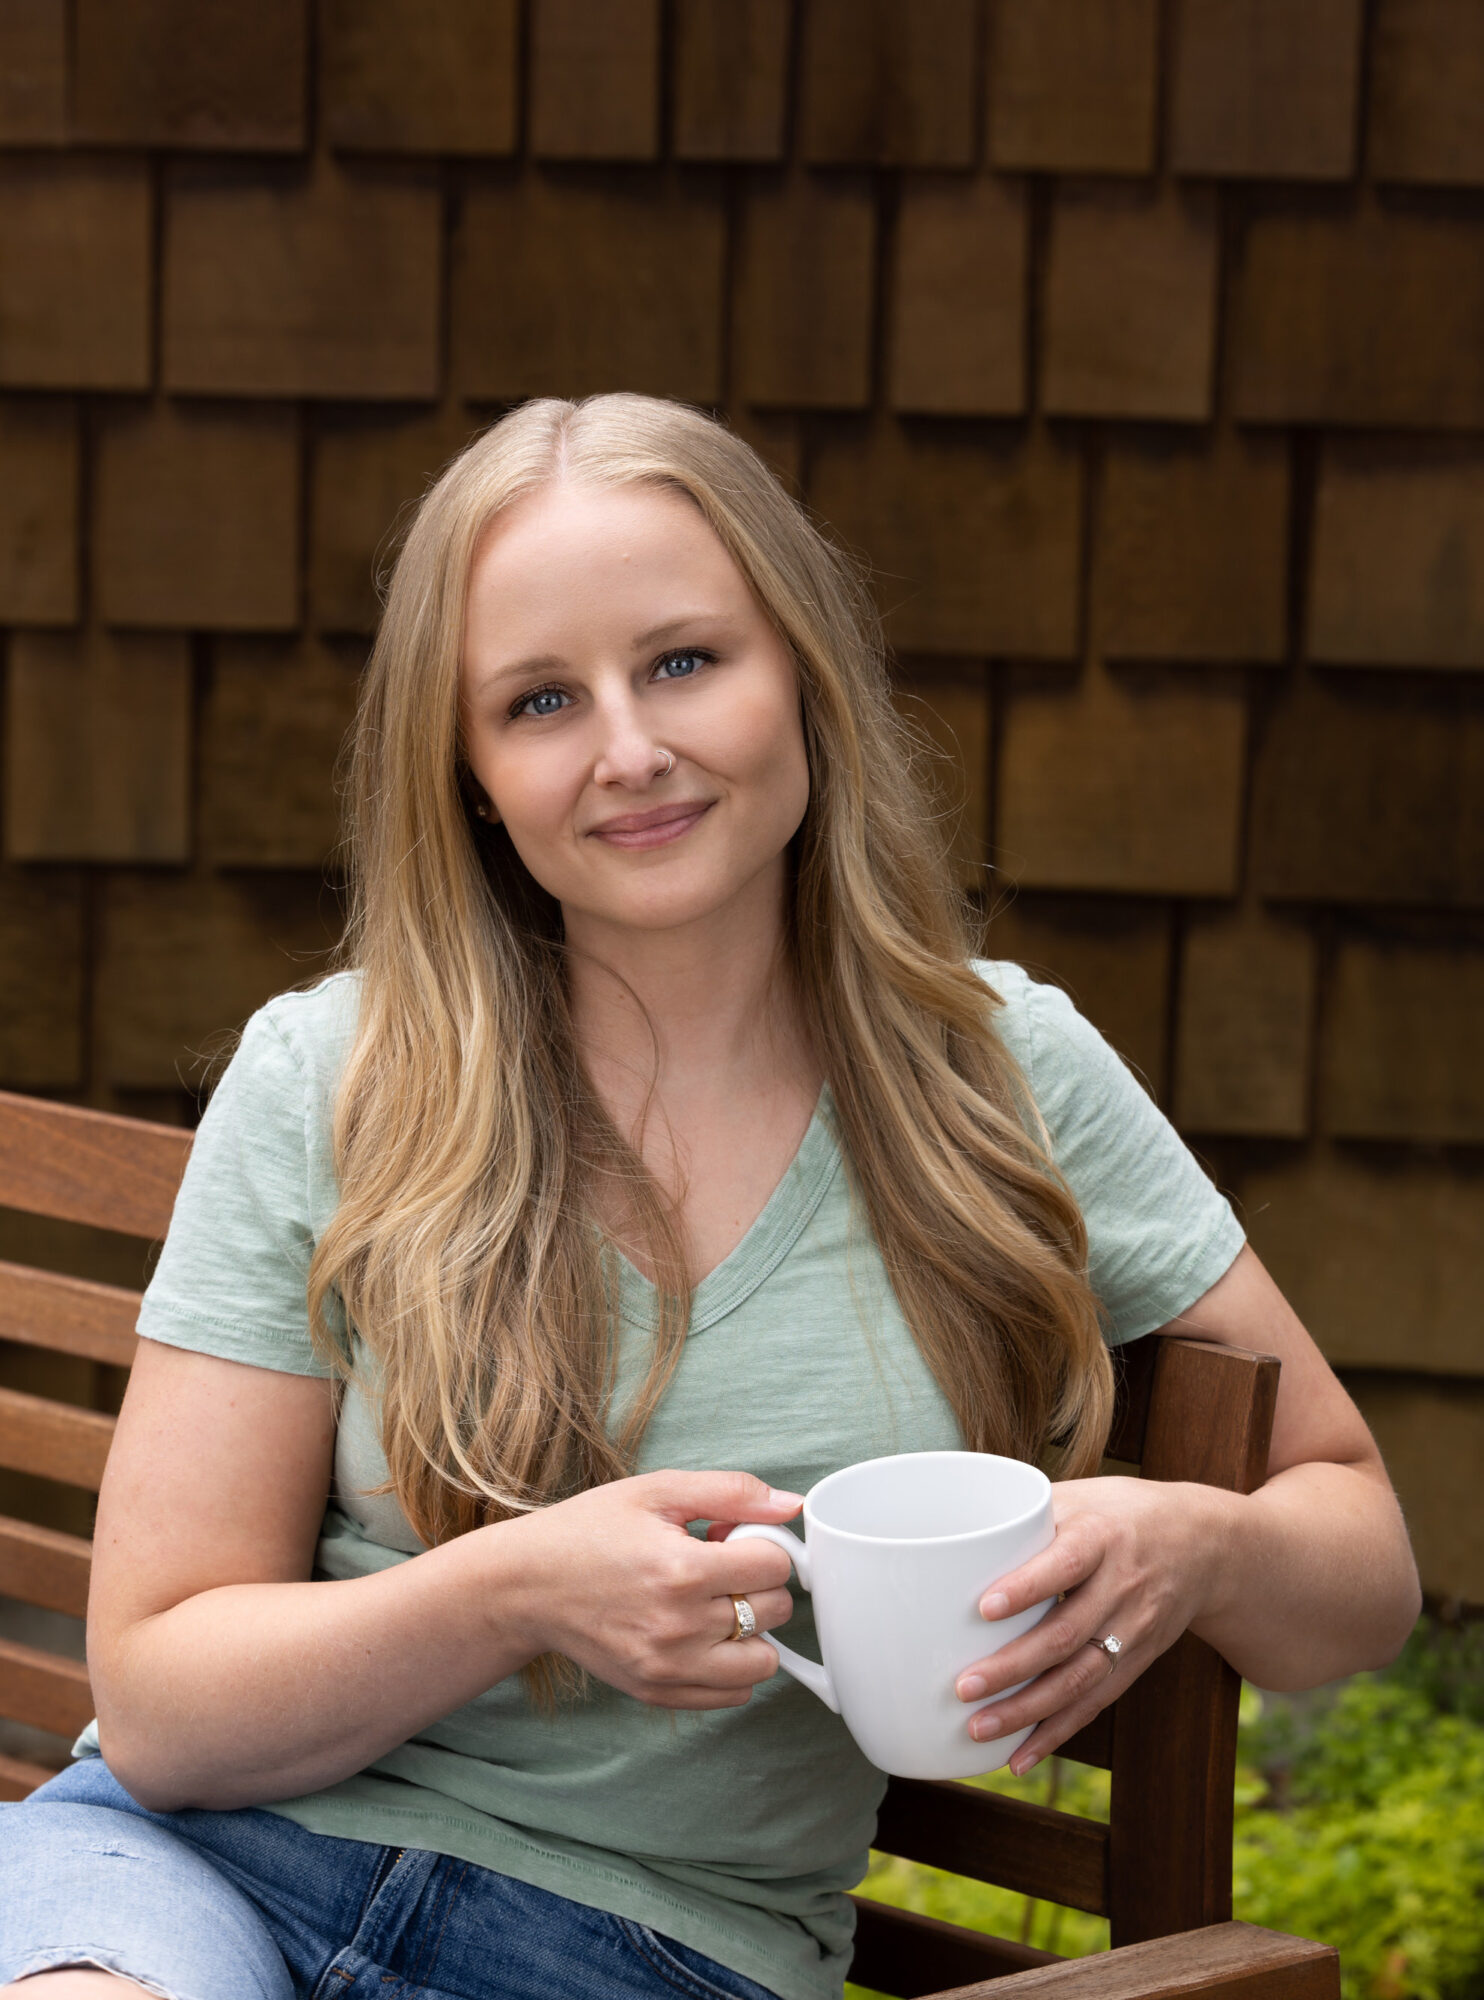 Empowered Voices member wearing a light green v-neck t-shirt sitting on a brown wooden slatted bench, holding a white coffee cup with dark brown cedar shake wall in background.